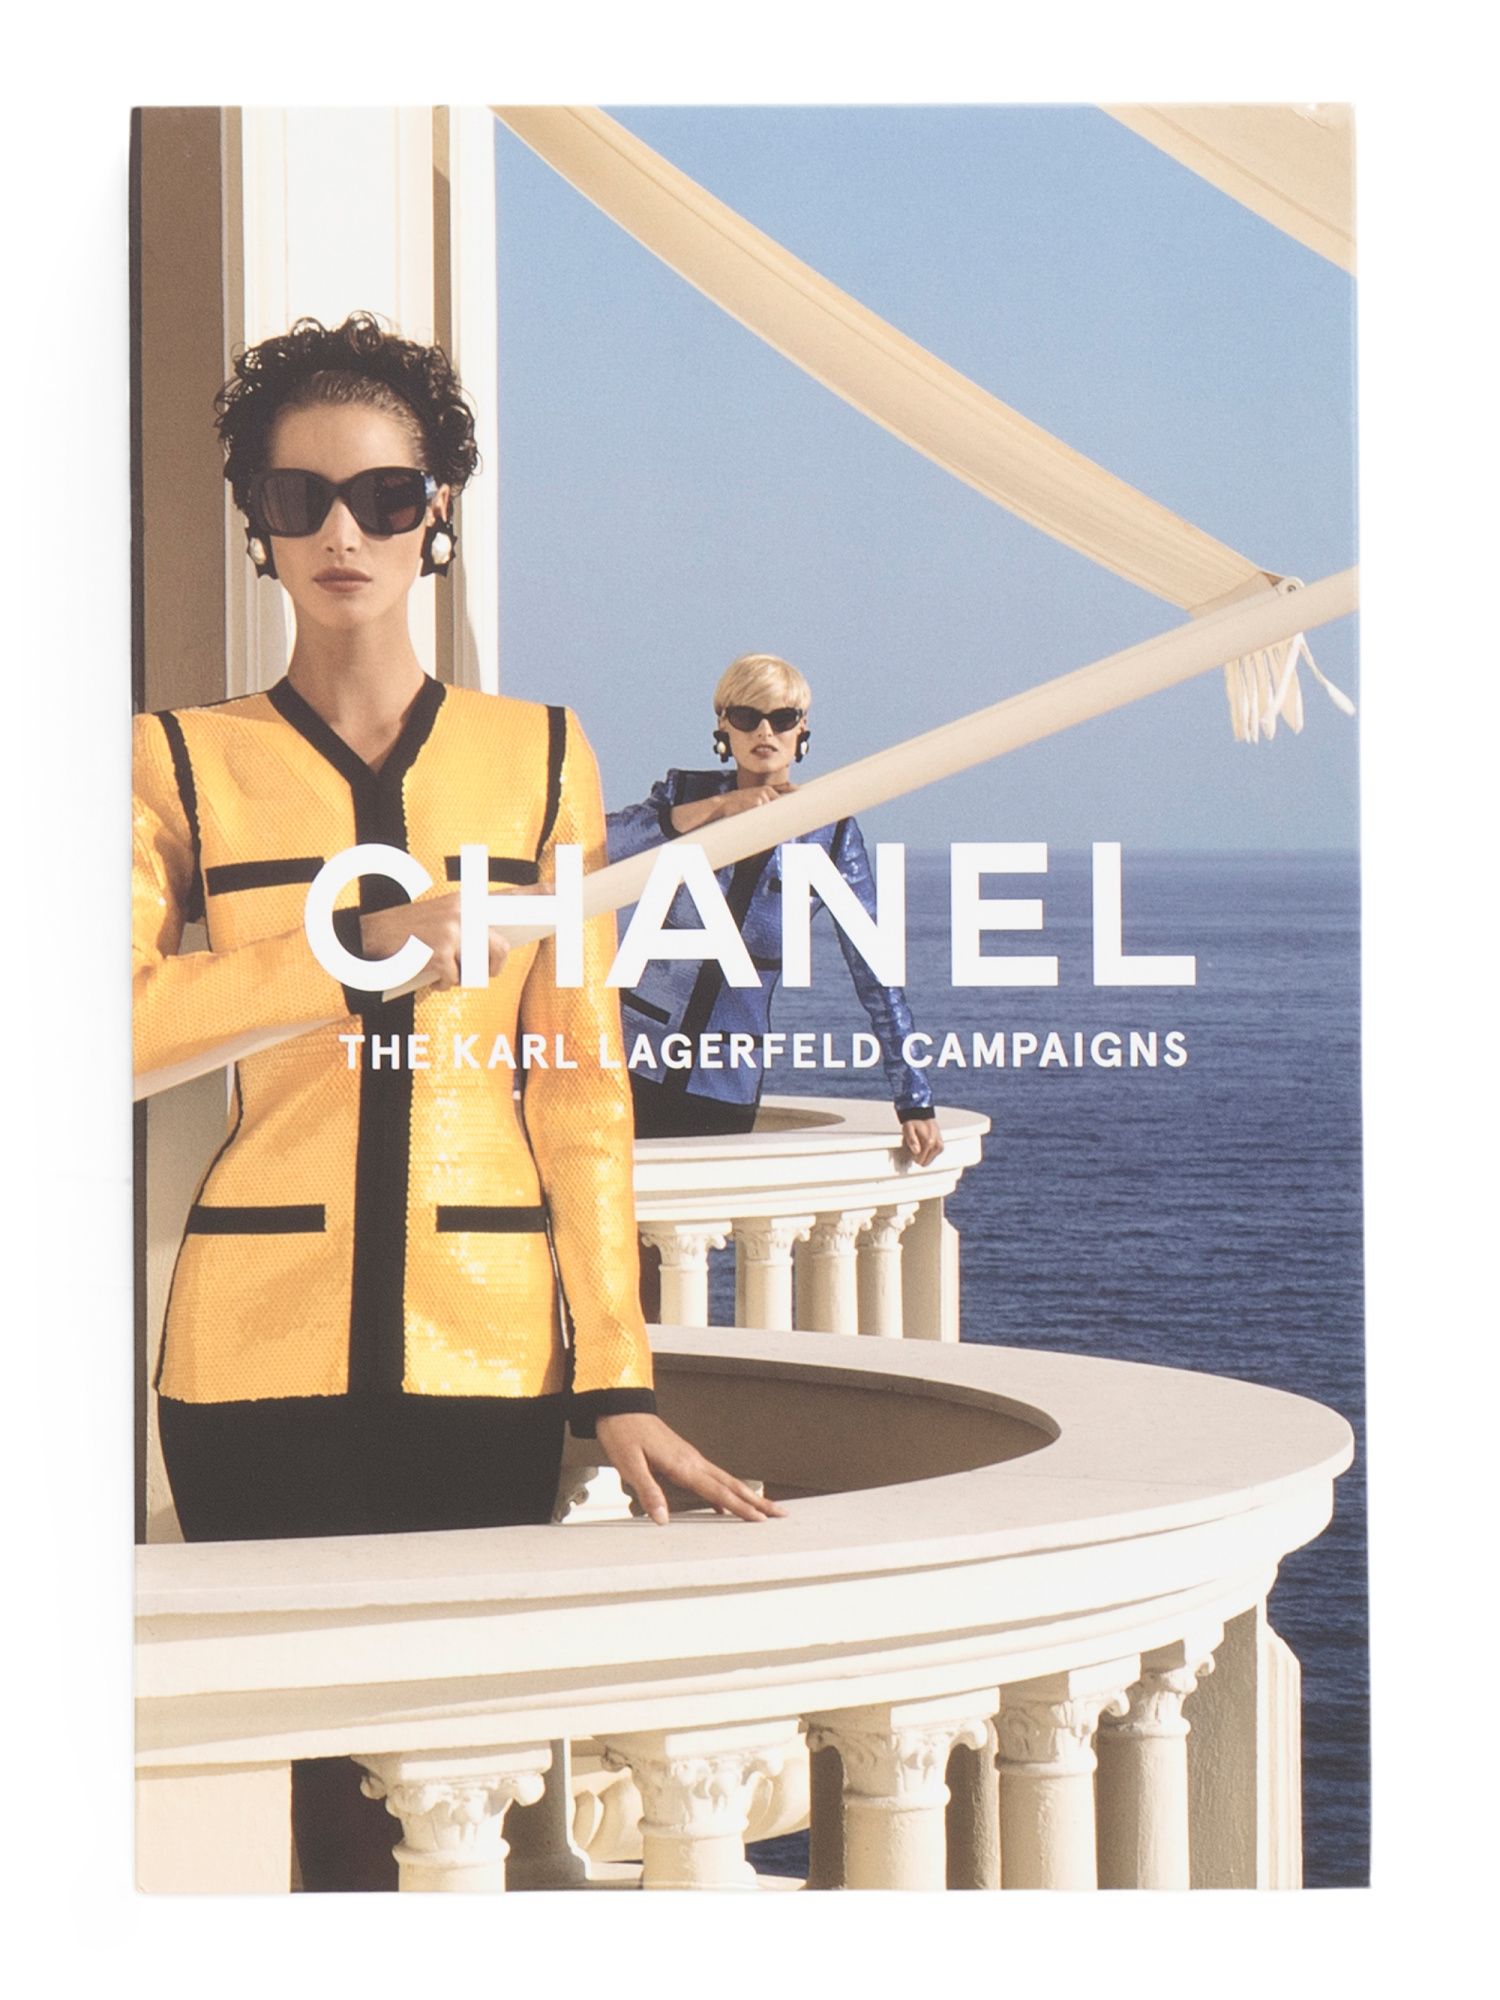 Chanel The Karl Lagerfeld Campaigns Book | Marshalls